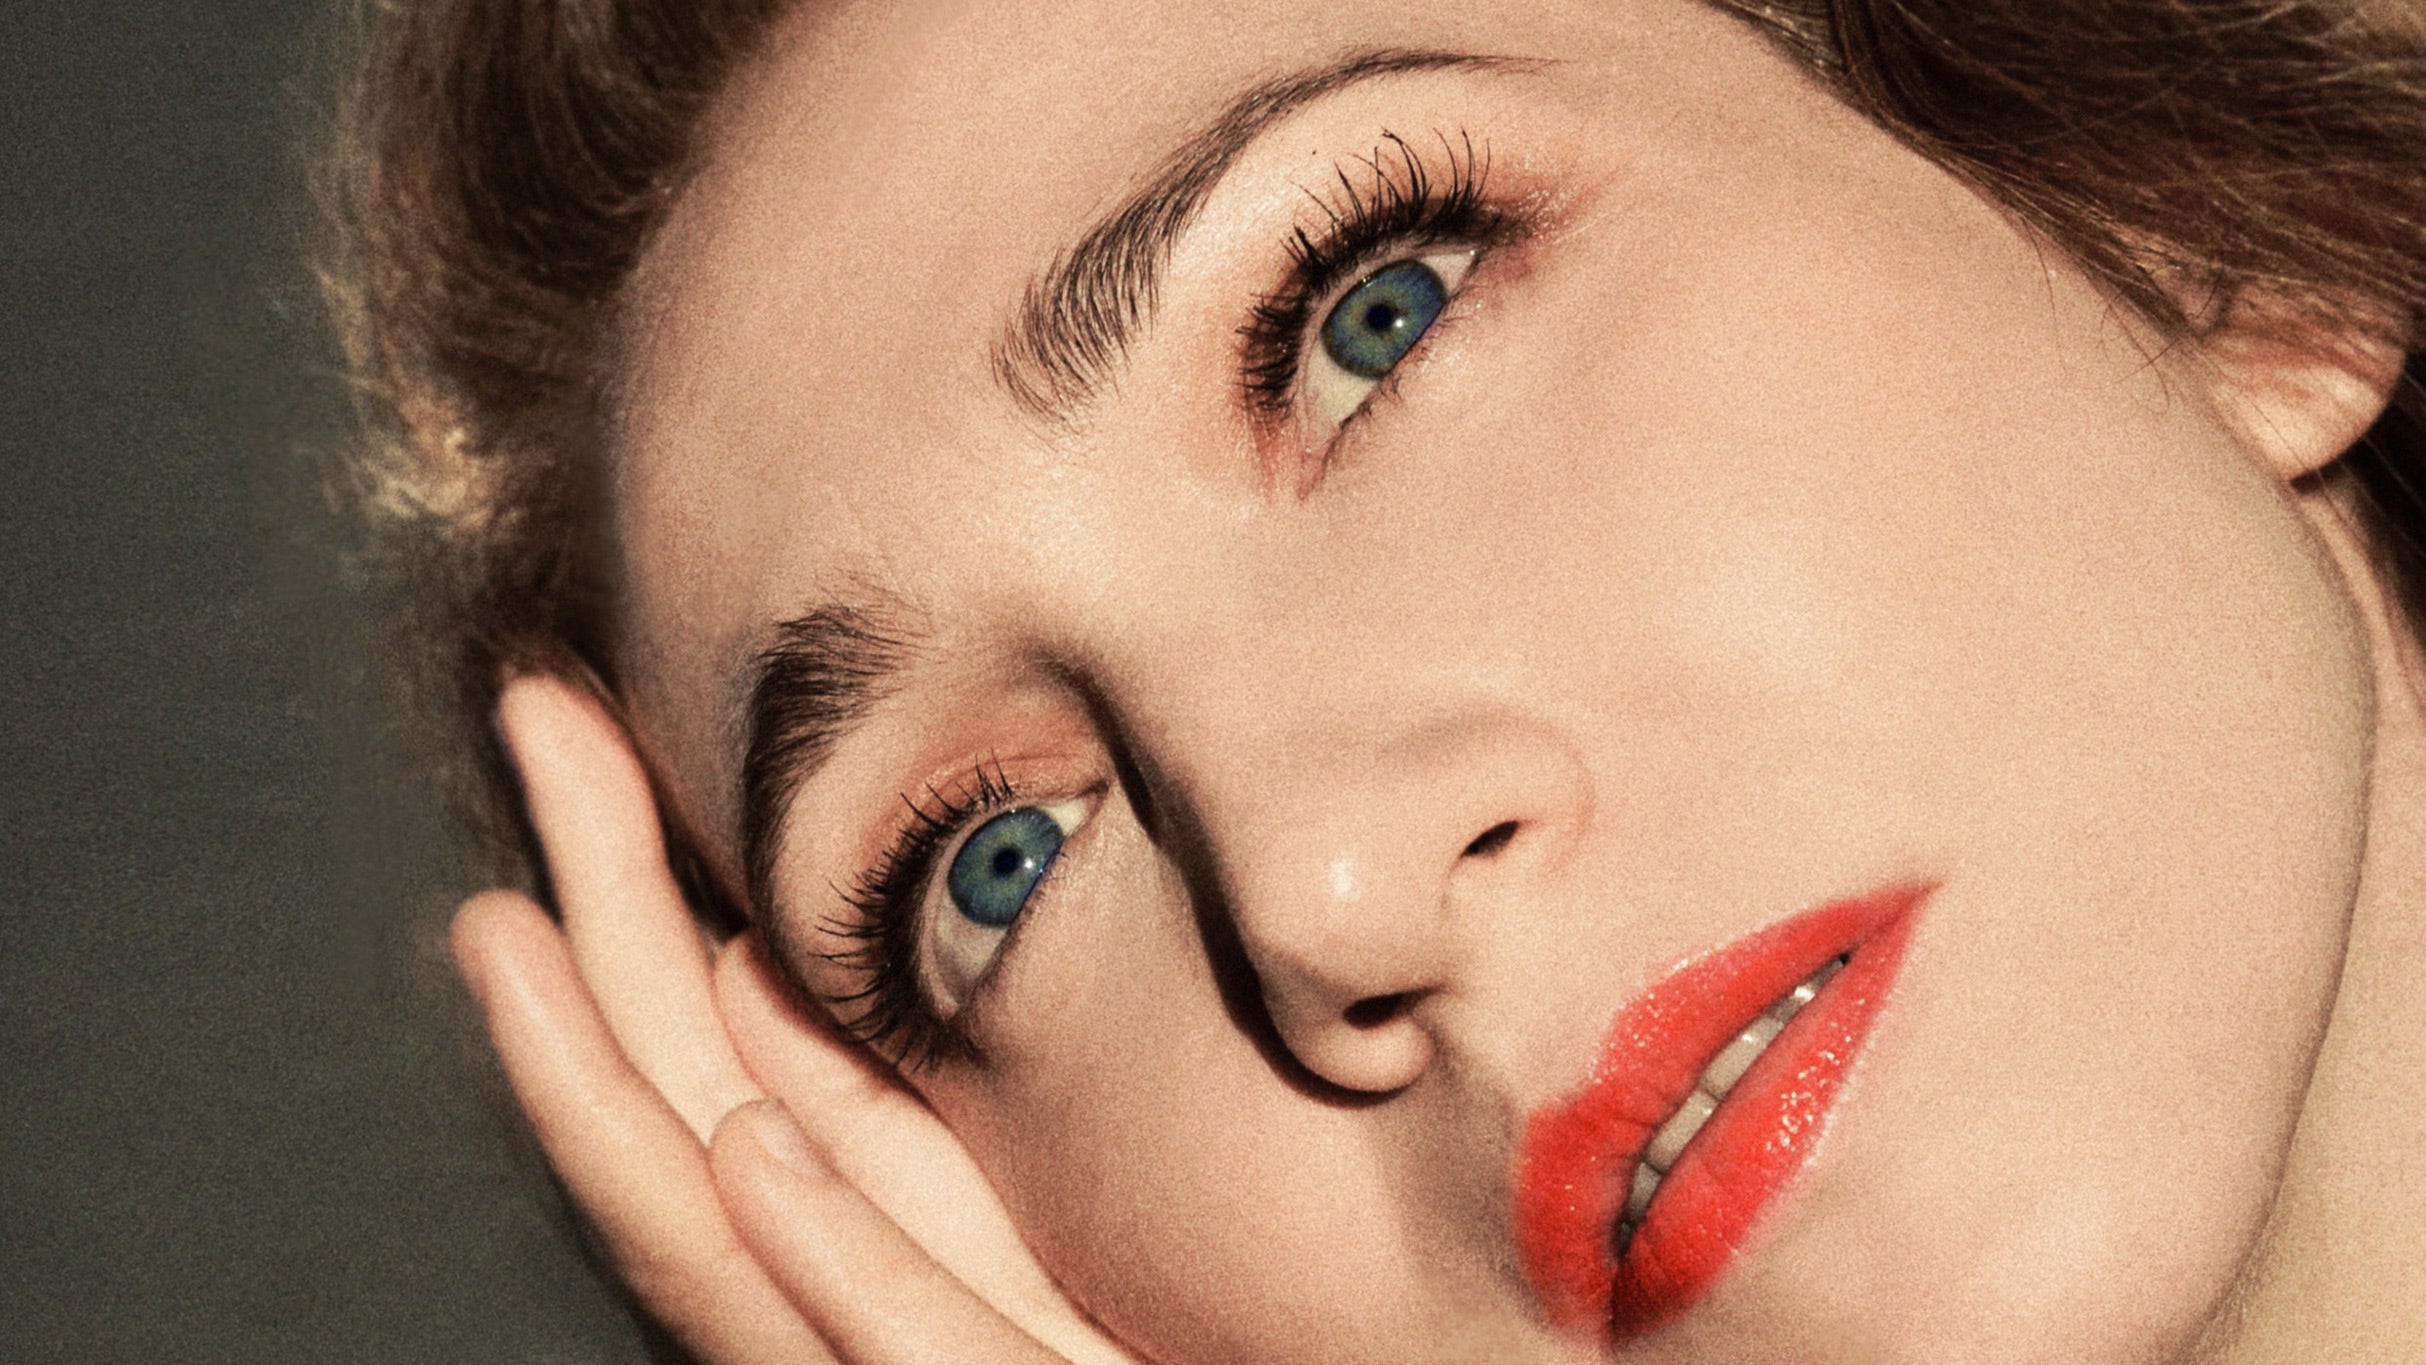 An Evening With Regina Spektor at The Wellmont Theater